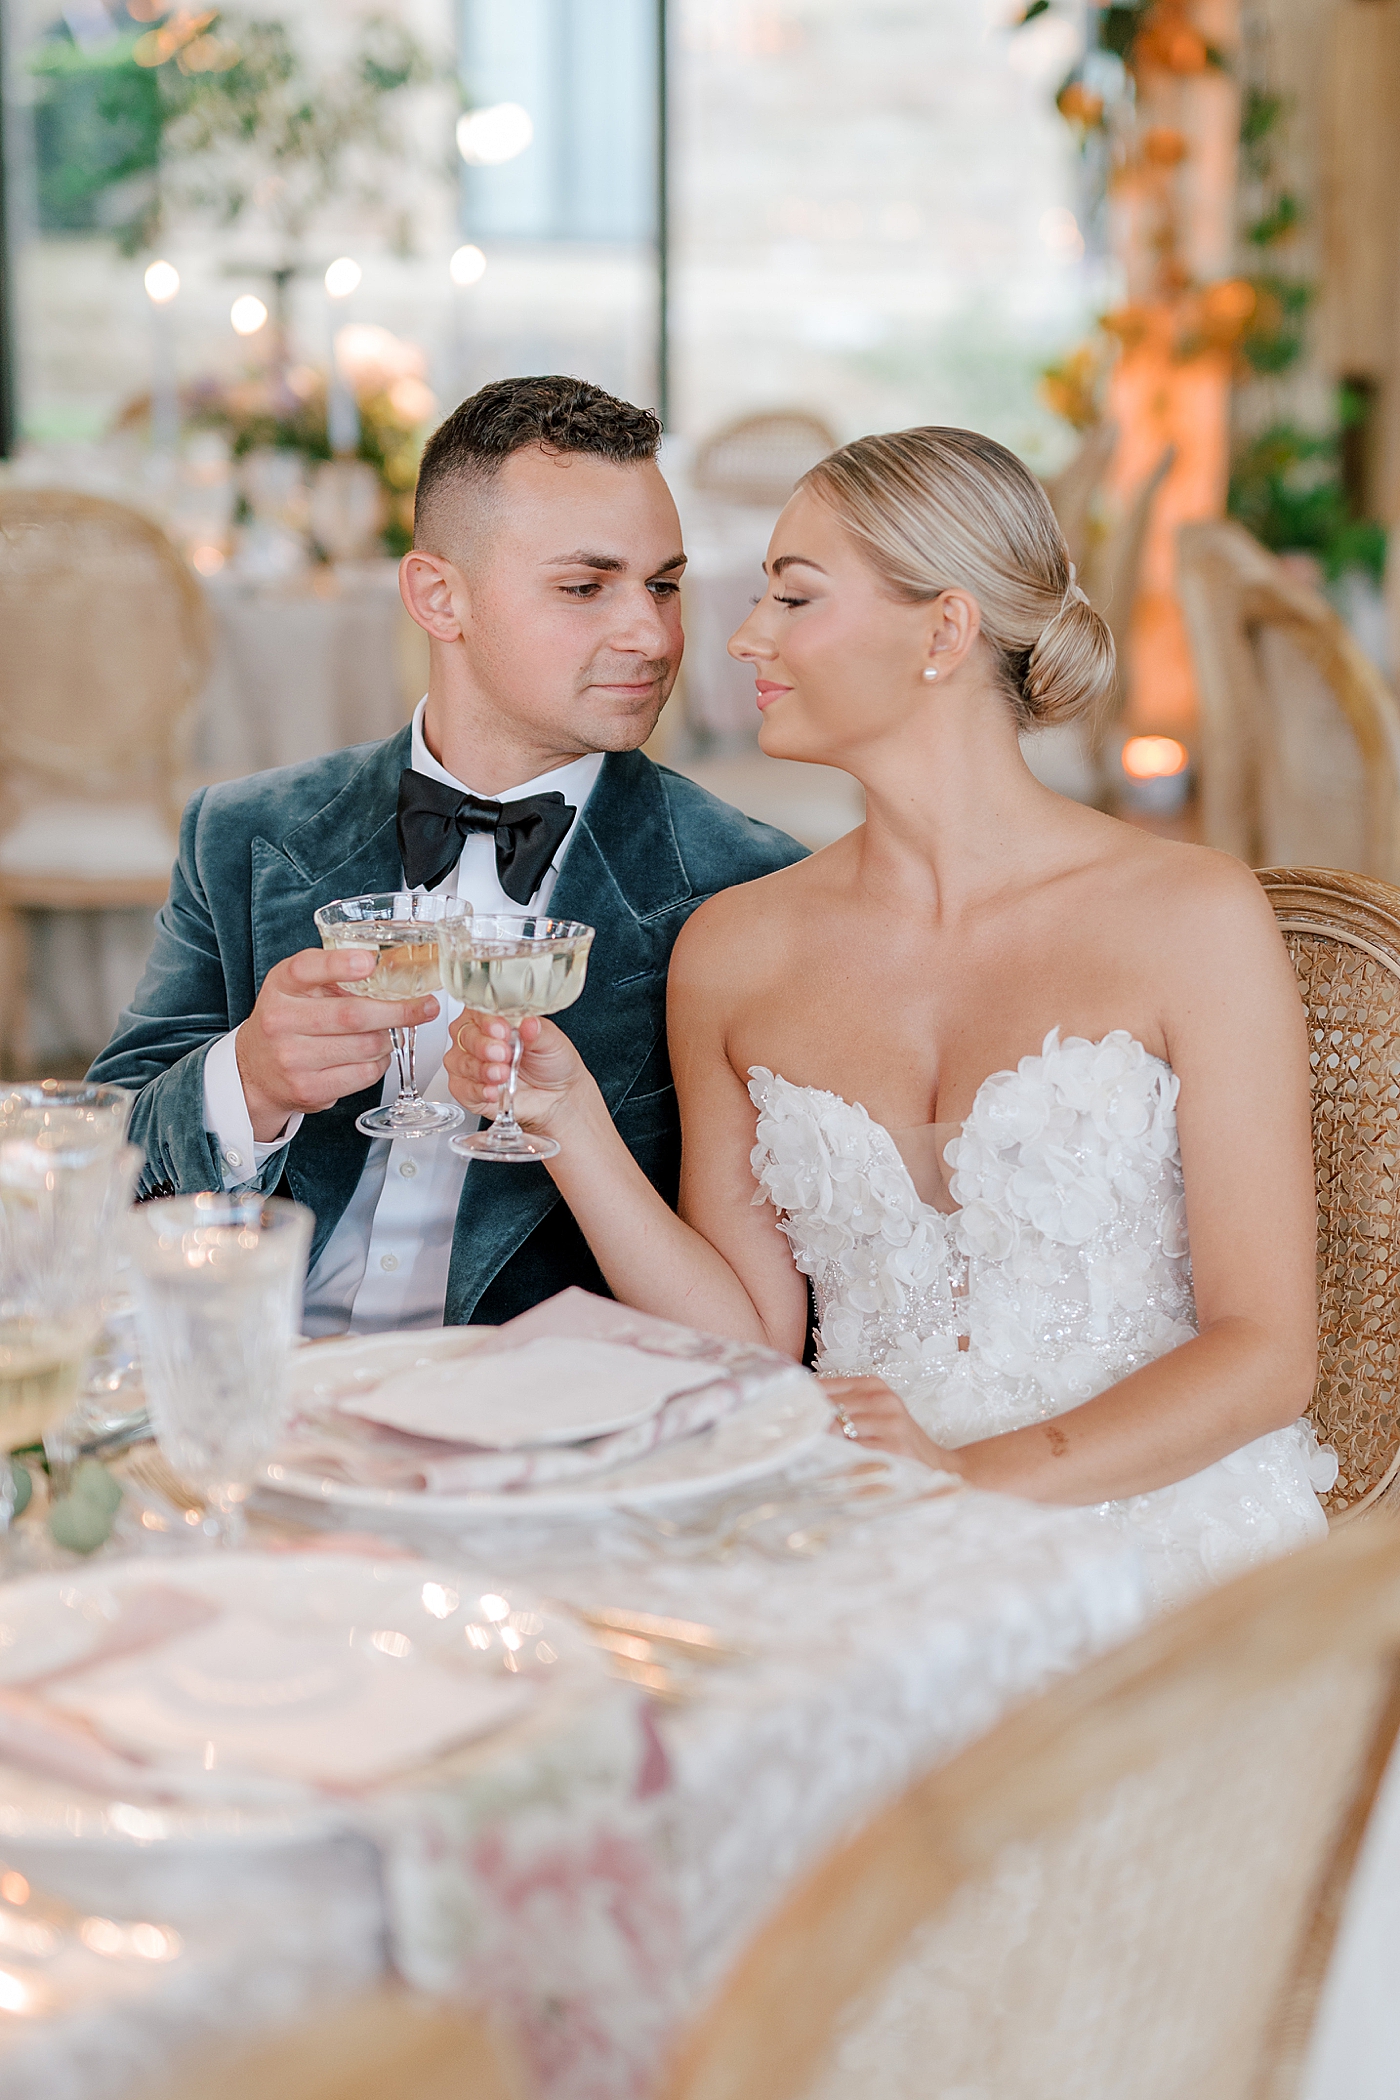 Bride and groom toast during their reception | Image by Hope Helmuth Photography